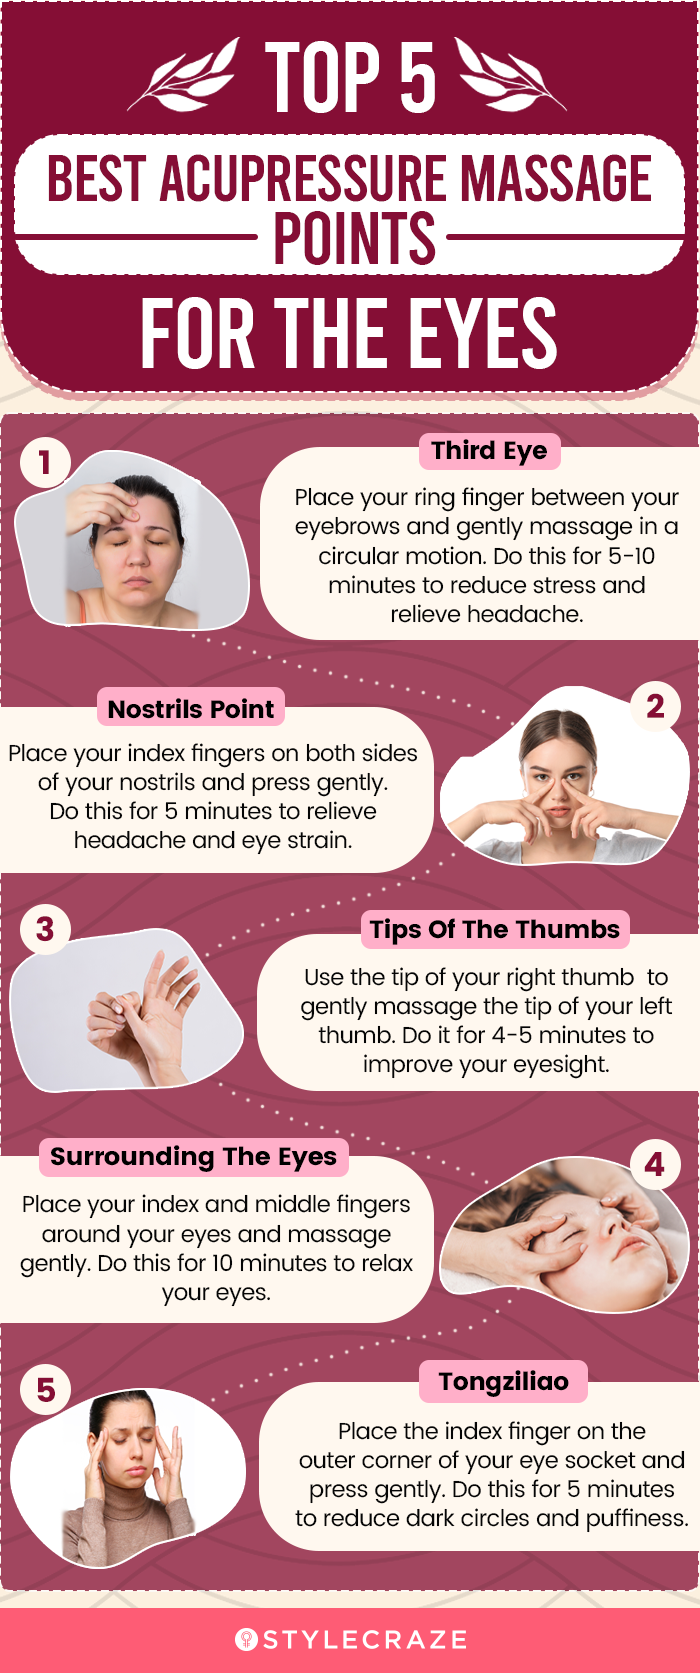 top 5 best acupressure massages for the eyes (infographic)